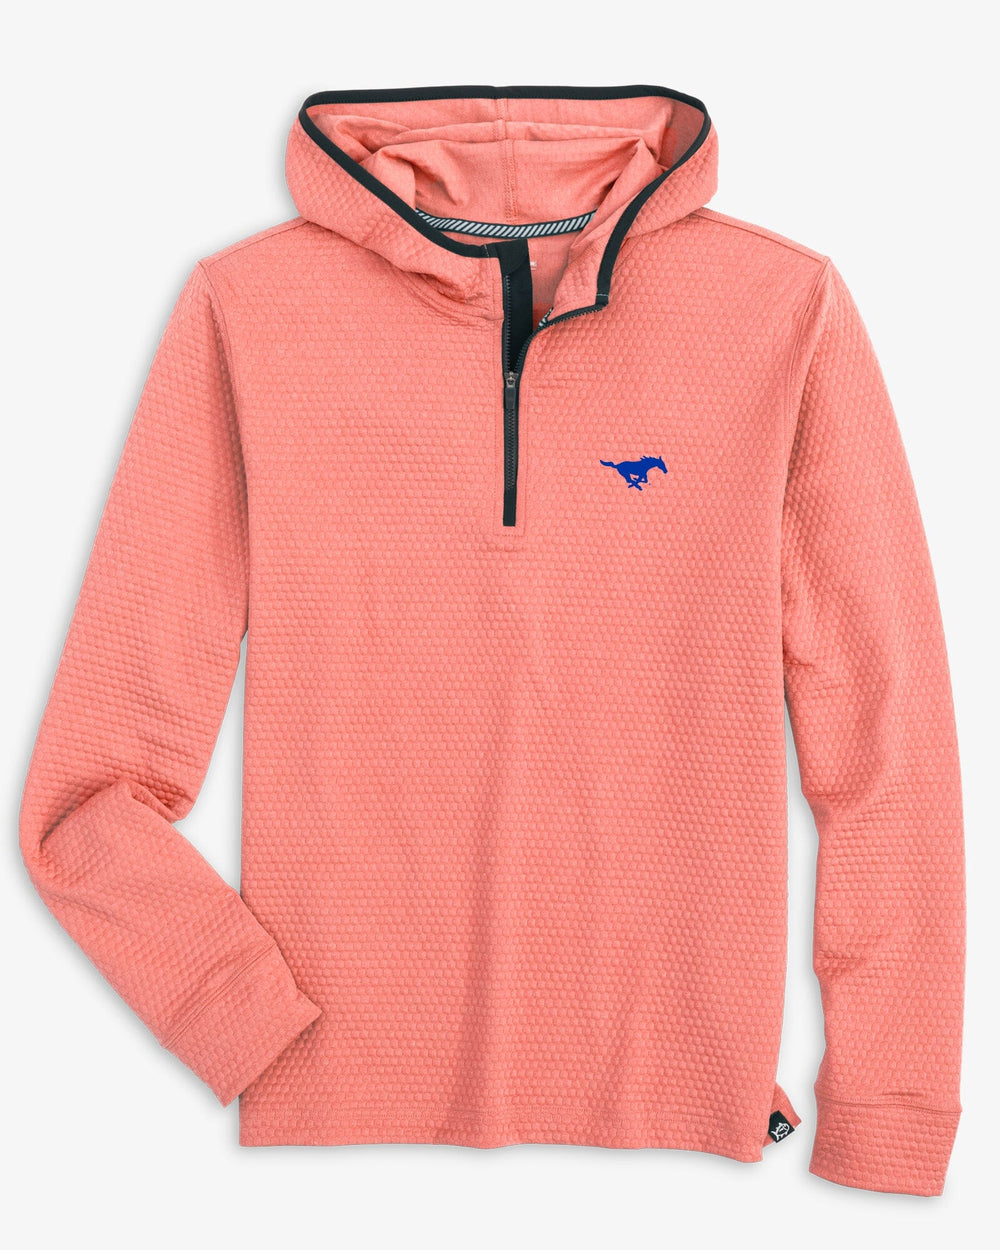 The front view of the SMU Mustangs Scuttle Heather Quarter Zip Hoodie by Southern Tide - Heather Rouge Red